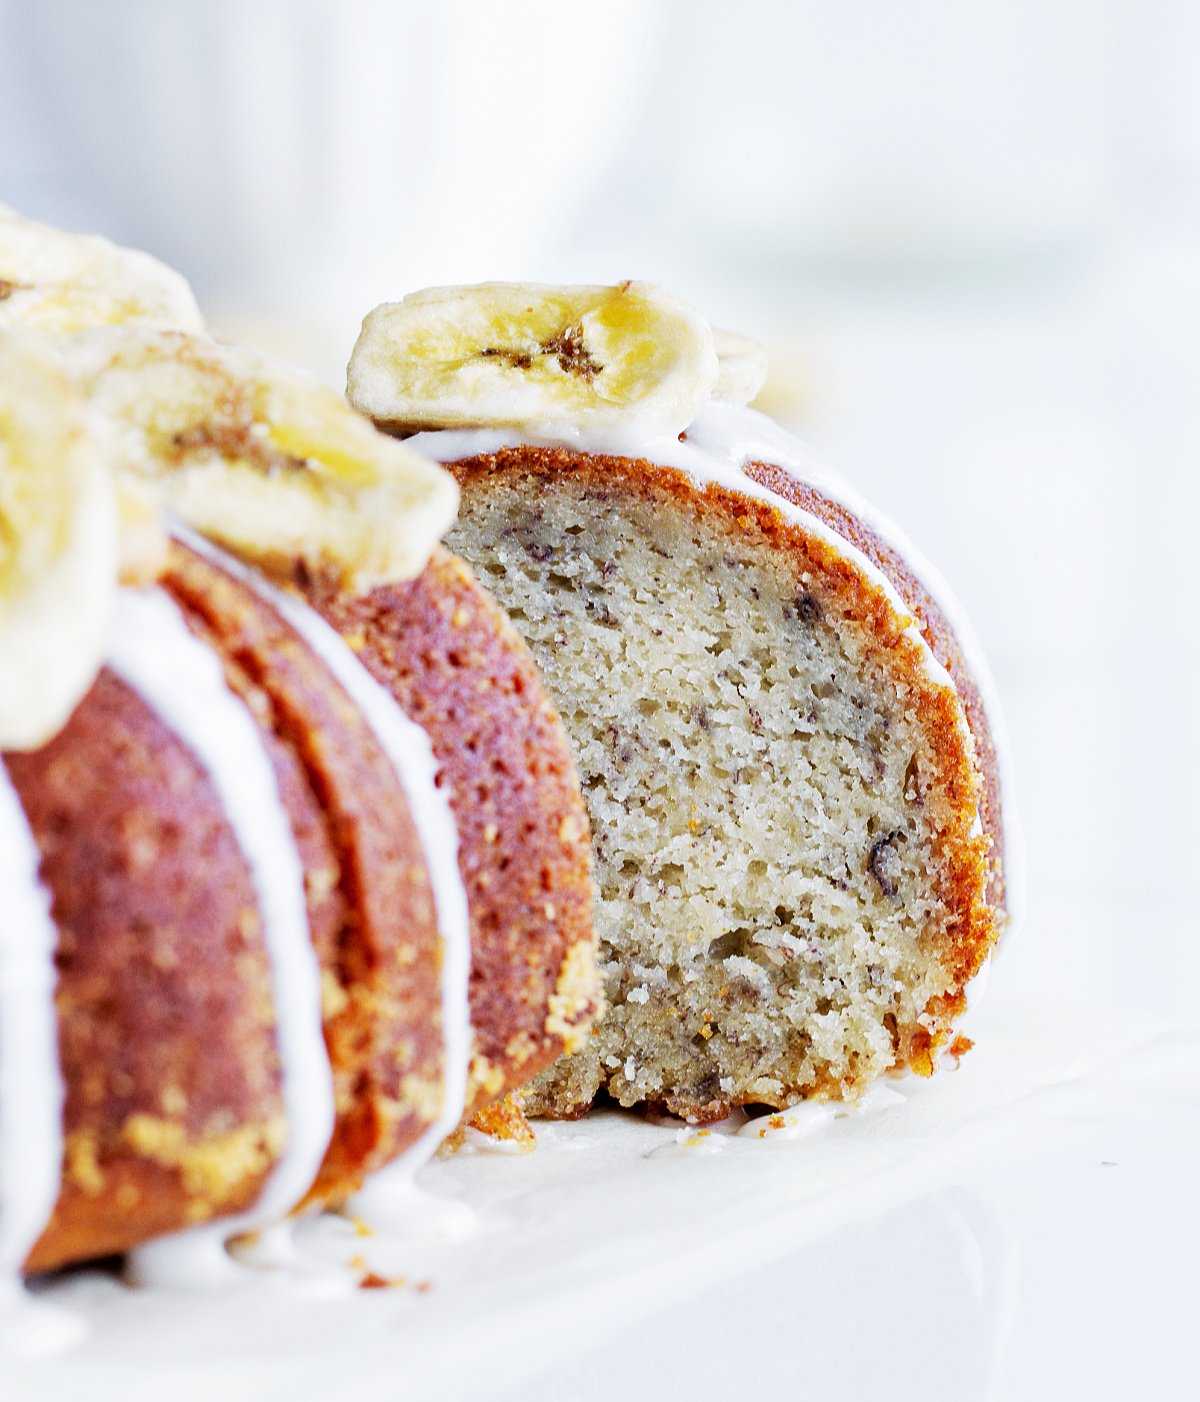 Slice of banana cake pulled out from whole bundt, white background.